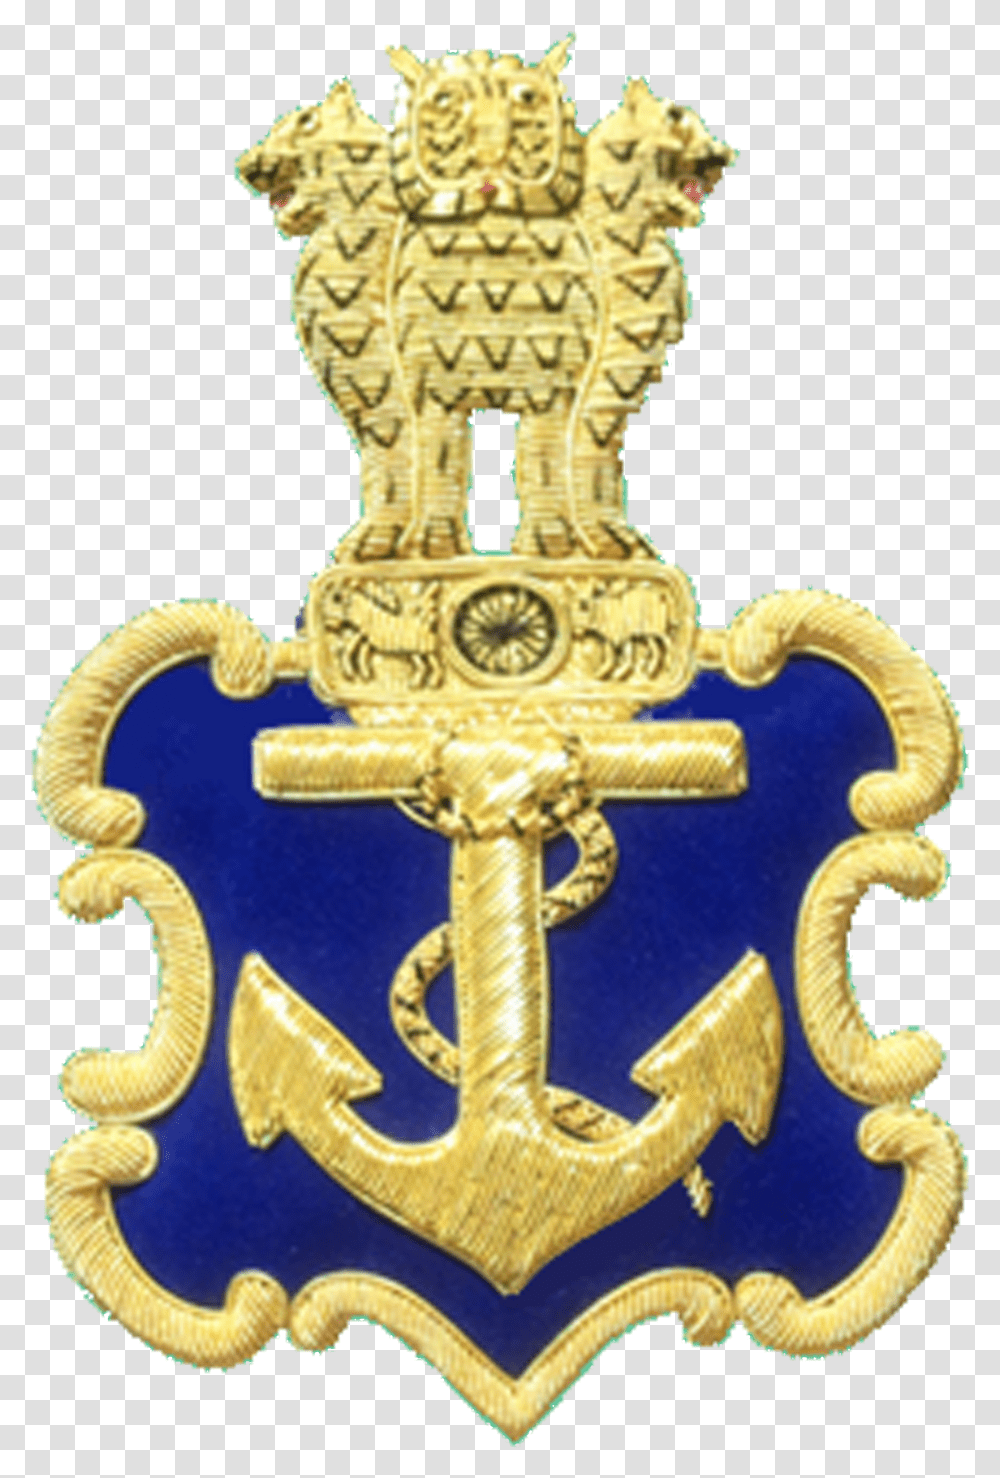 Indian Navy Navy Ranks In India Transparent Png